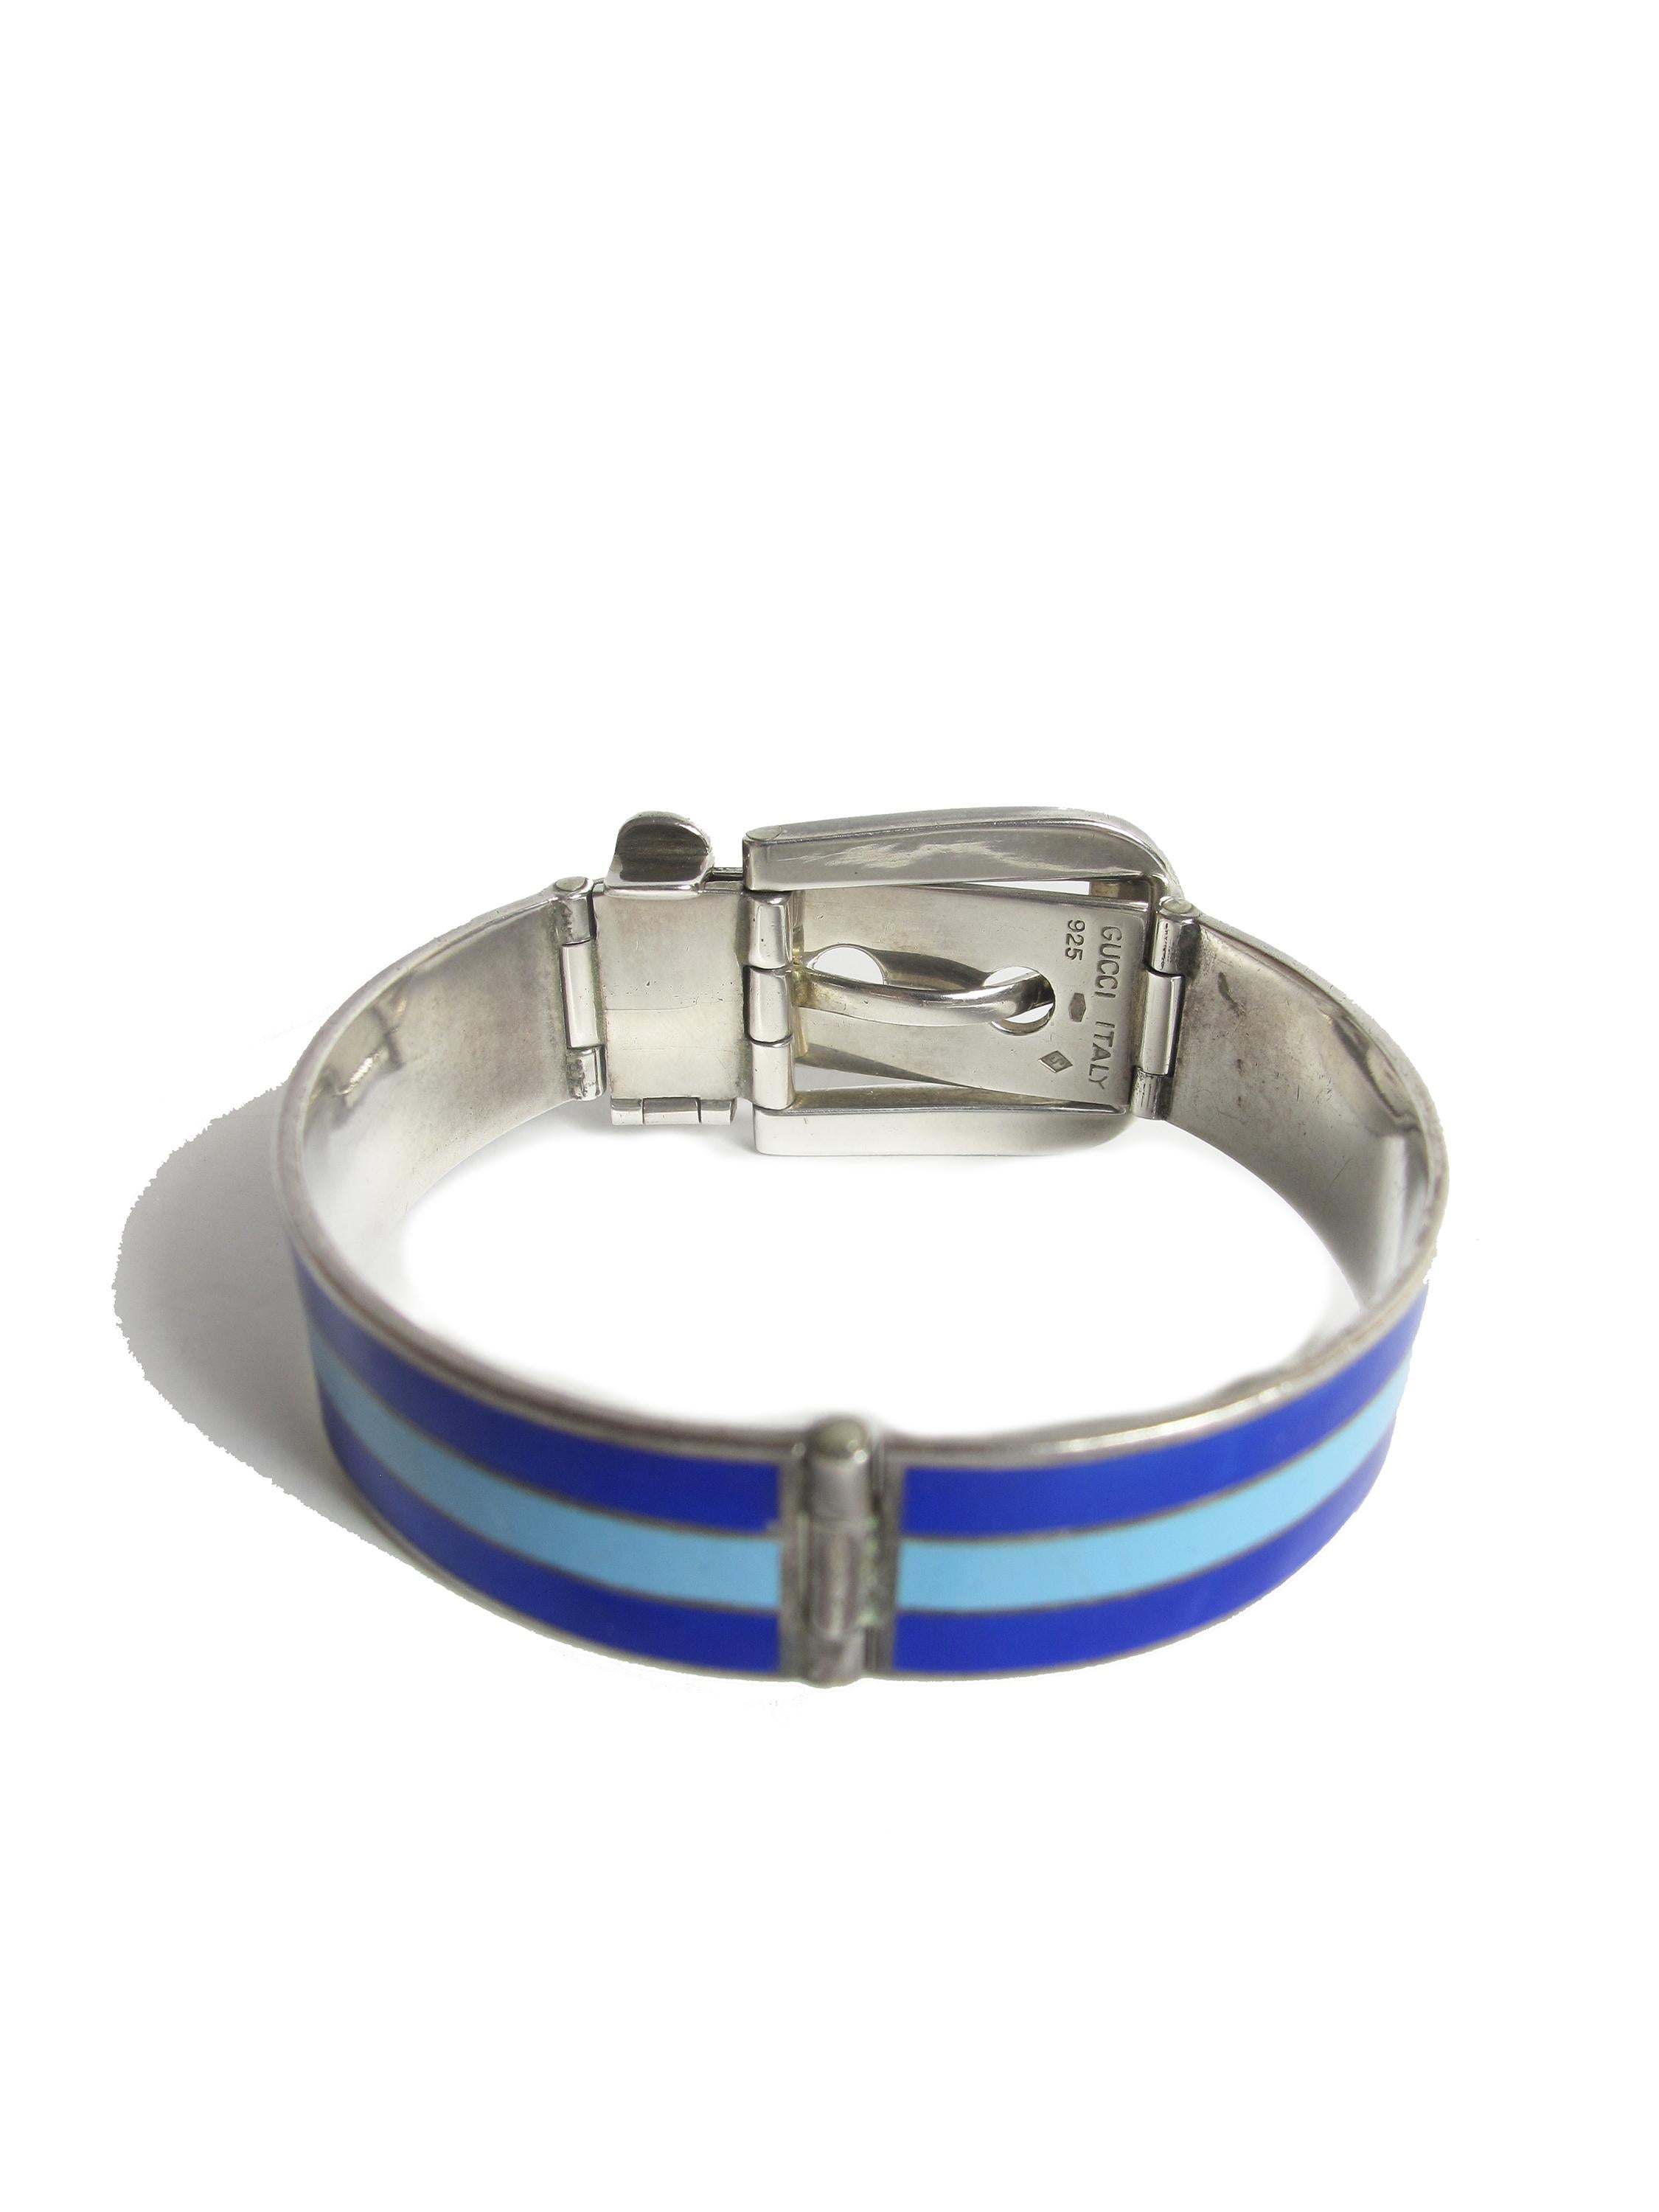 GUCCI 1970s enamel striped bracelet.  Sterling silver , buckle opens. 

Condition: Very good, some all over wear. 